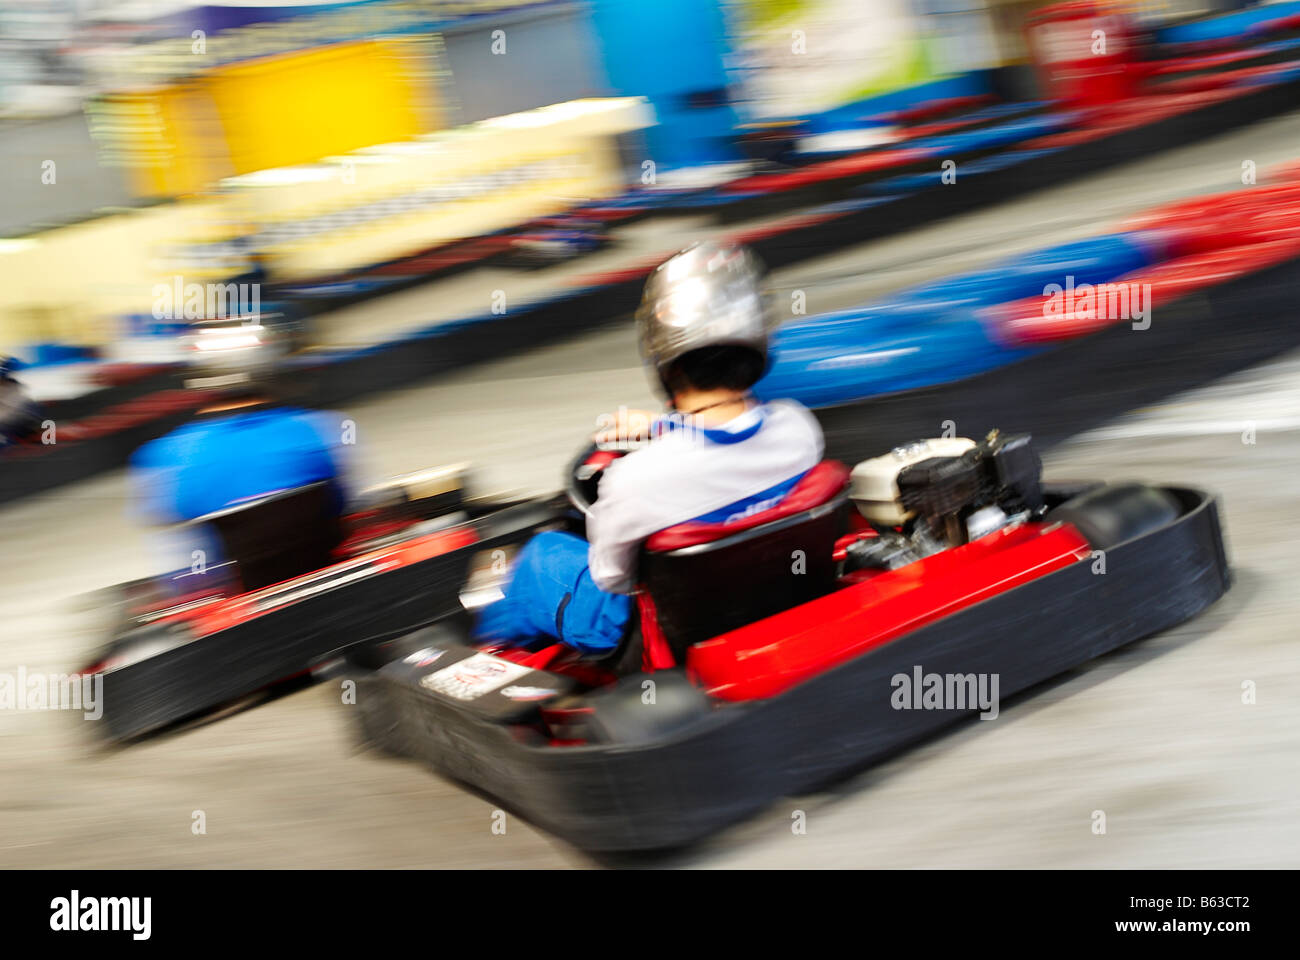 Rear view of two people go-carting on a motor racing track Stock Photo